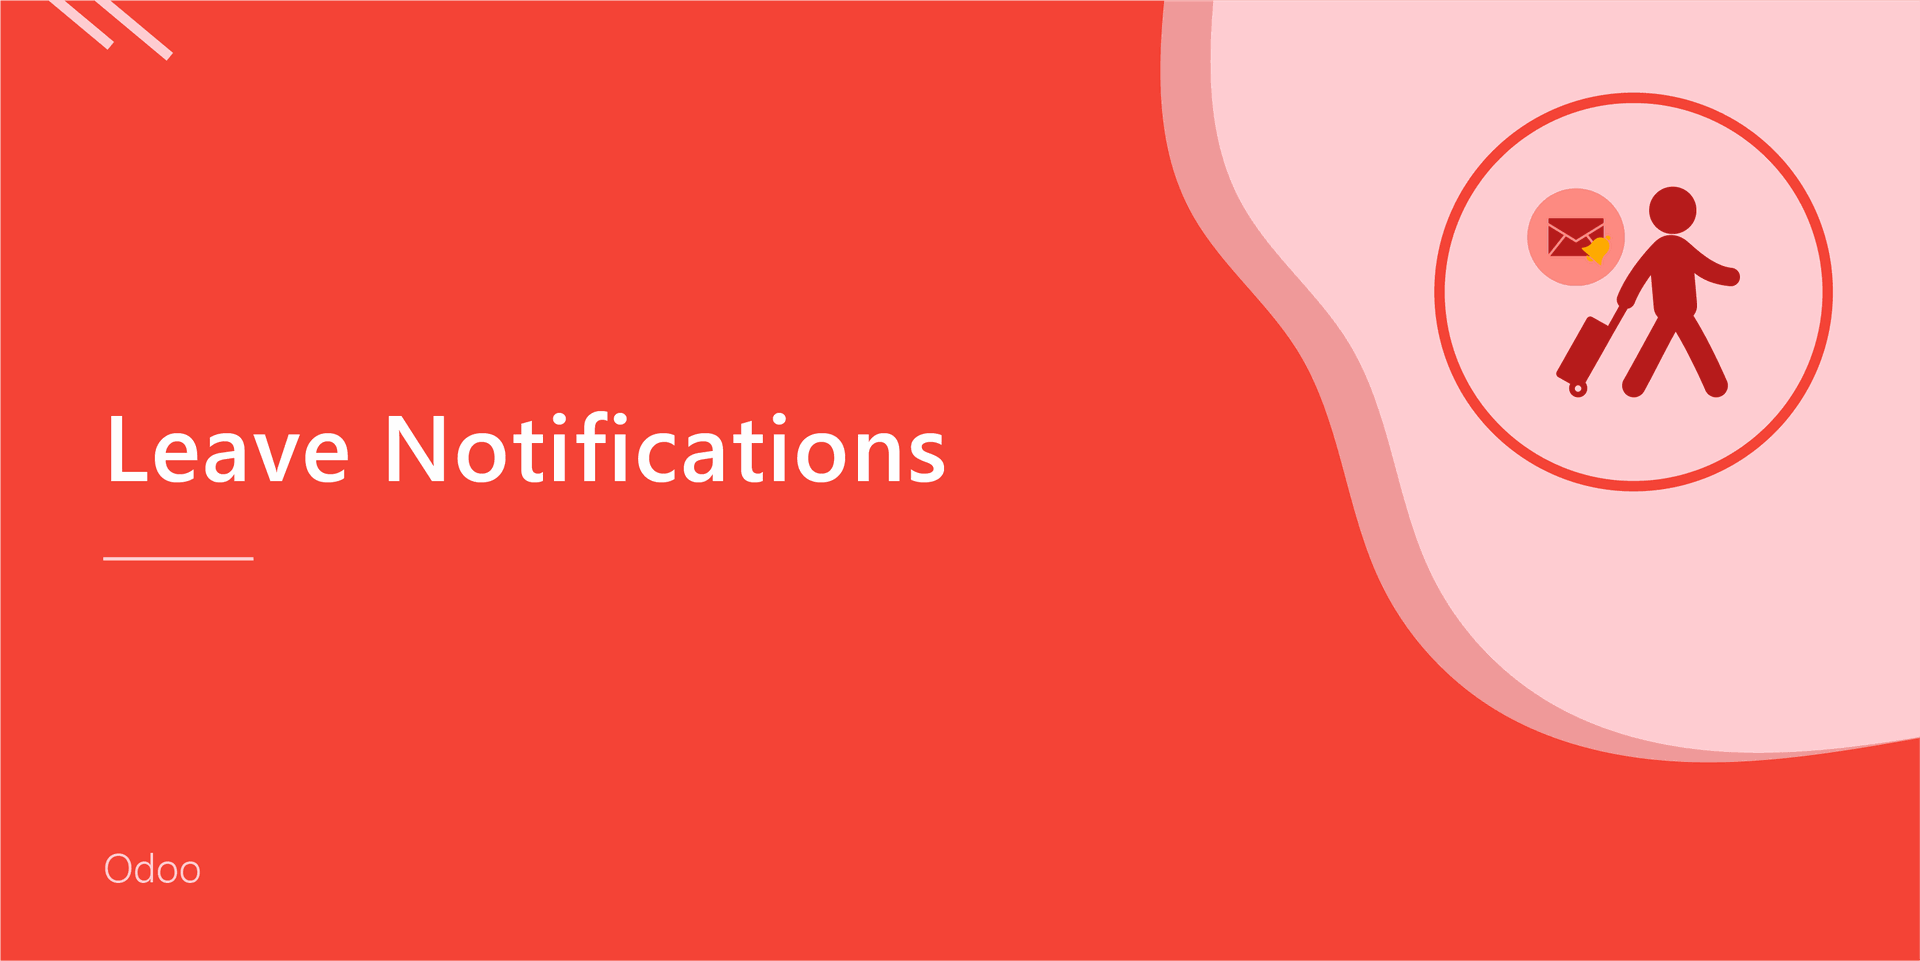 Leave Notifications